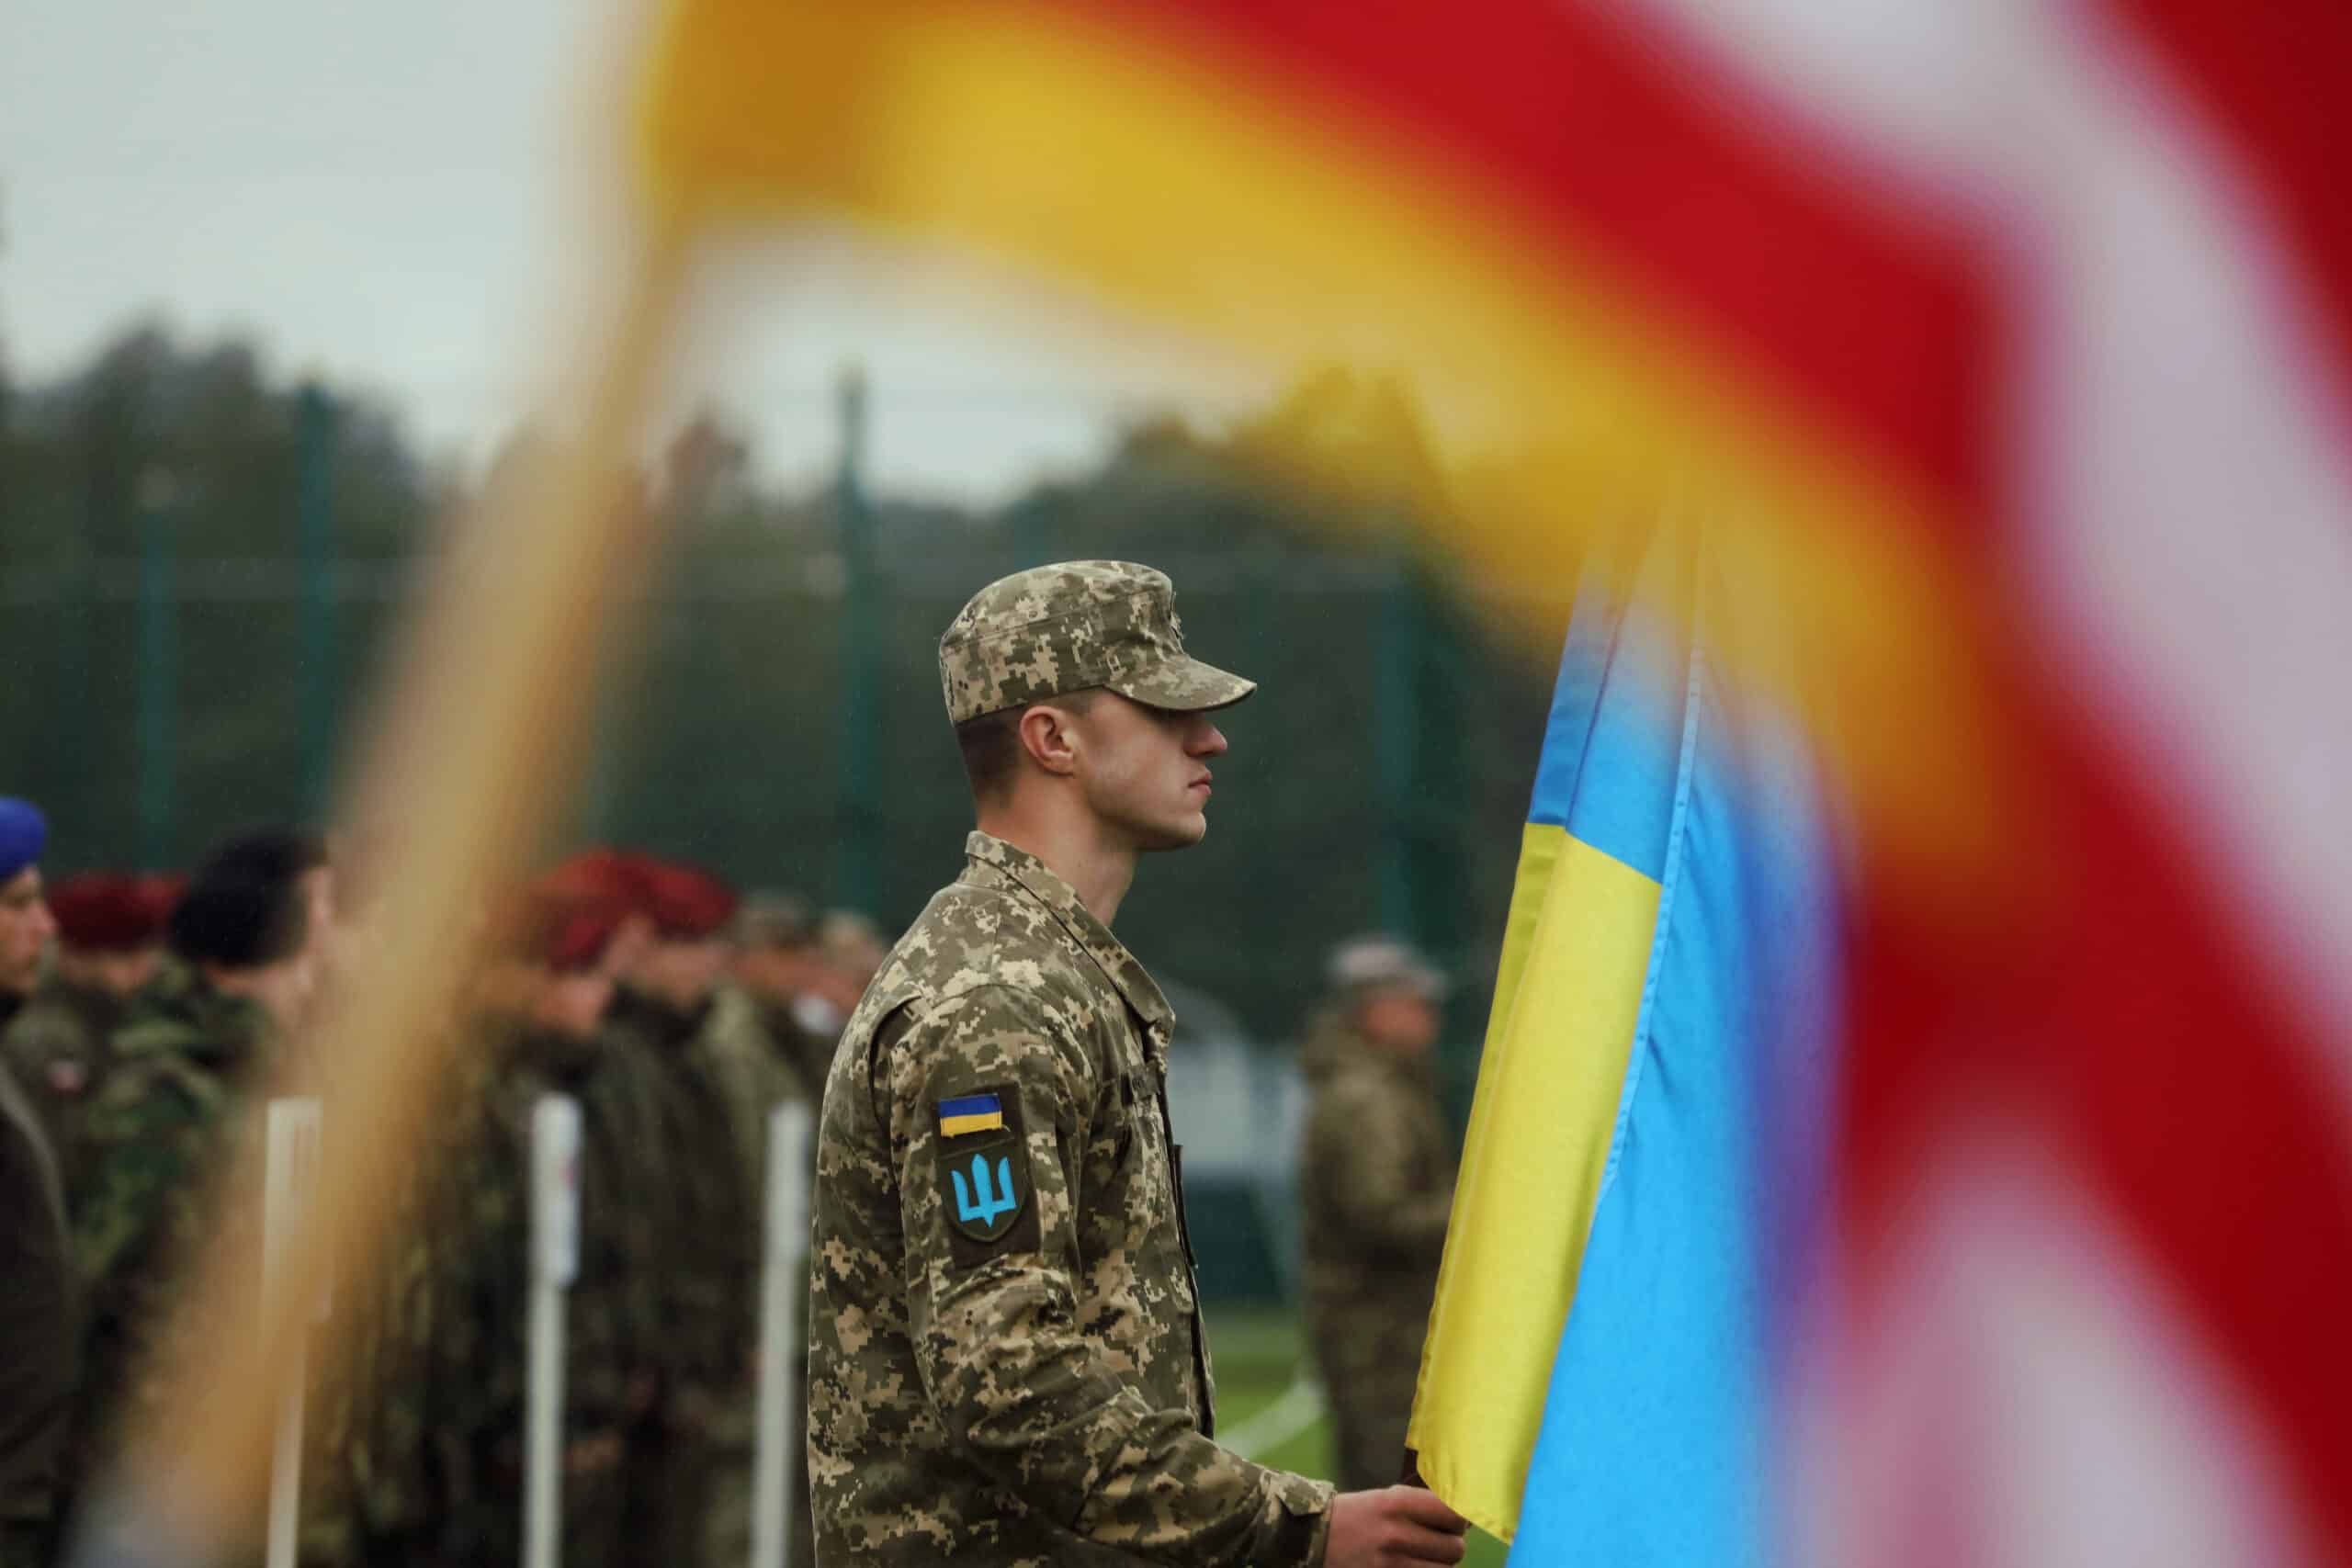 Ukrainian soldier stands at the front of his formation